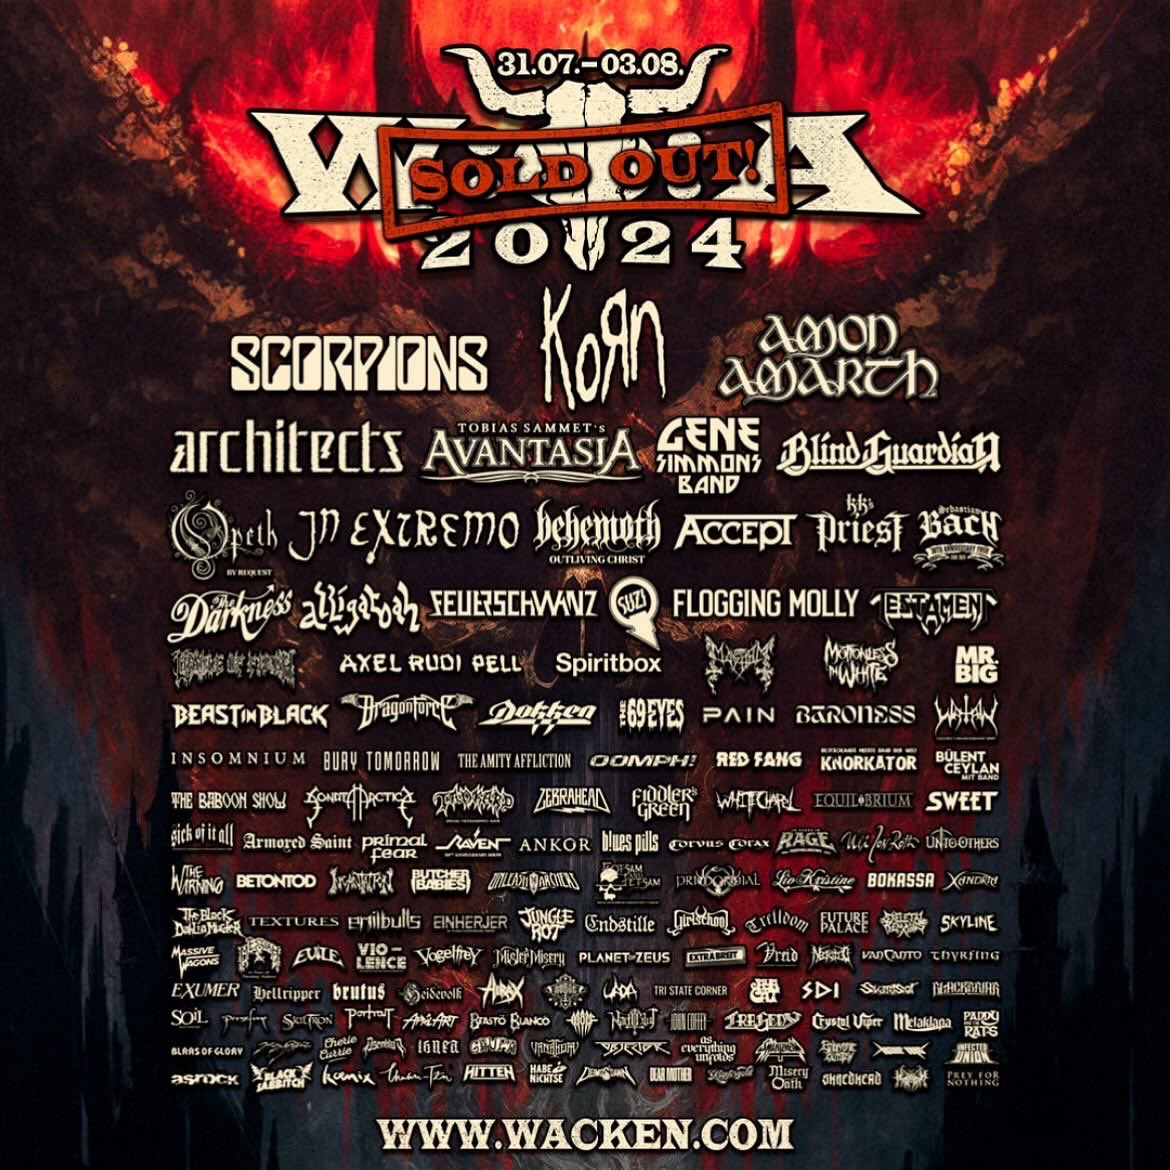 Unto Others to play the Legendary Wacken Open Air this summer in Germany Bio.to/uopdx